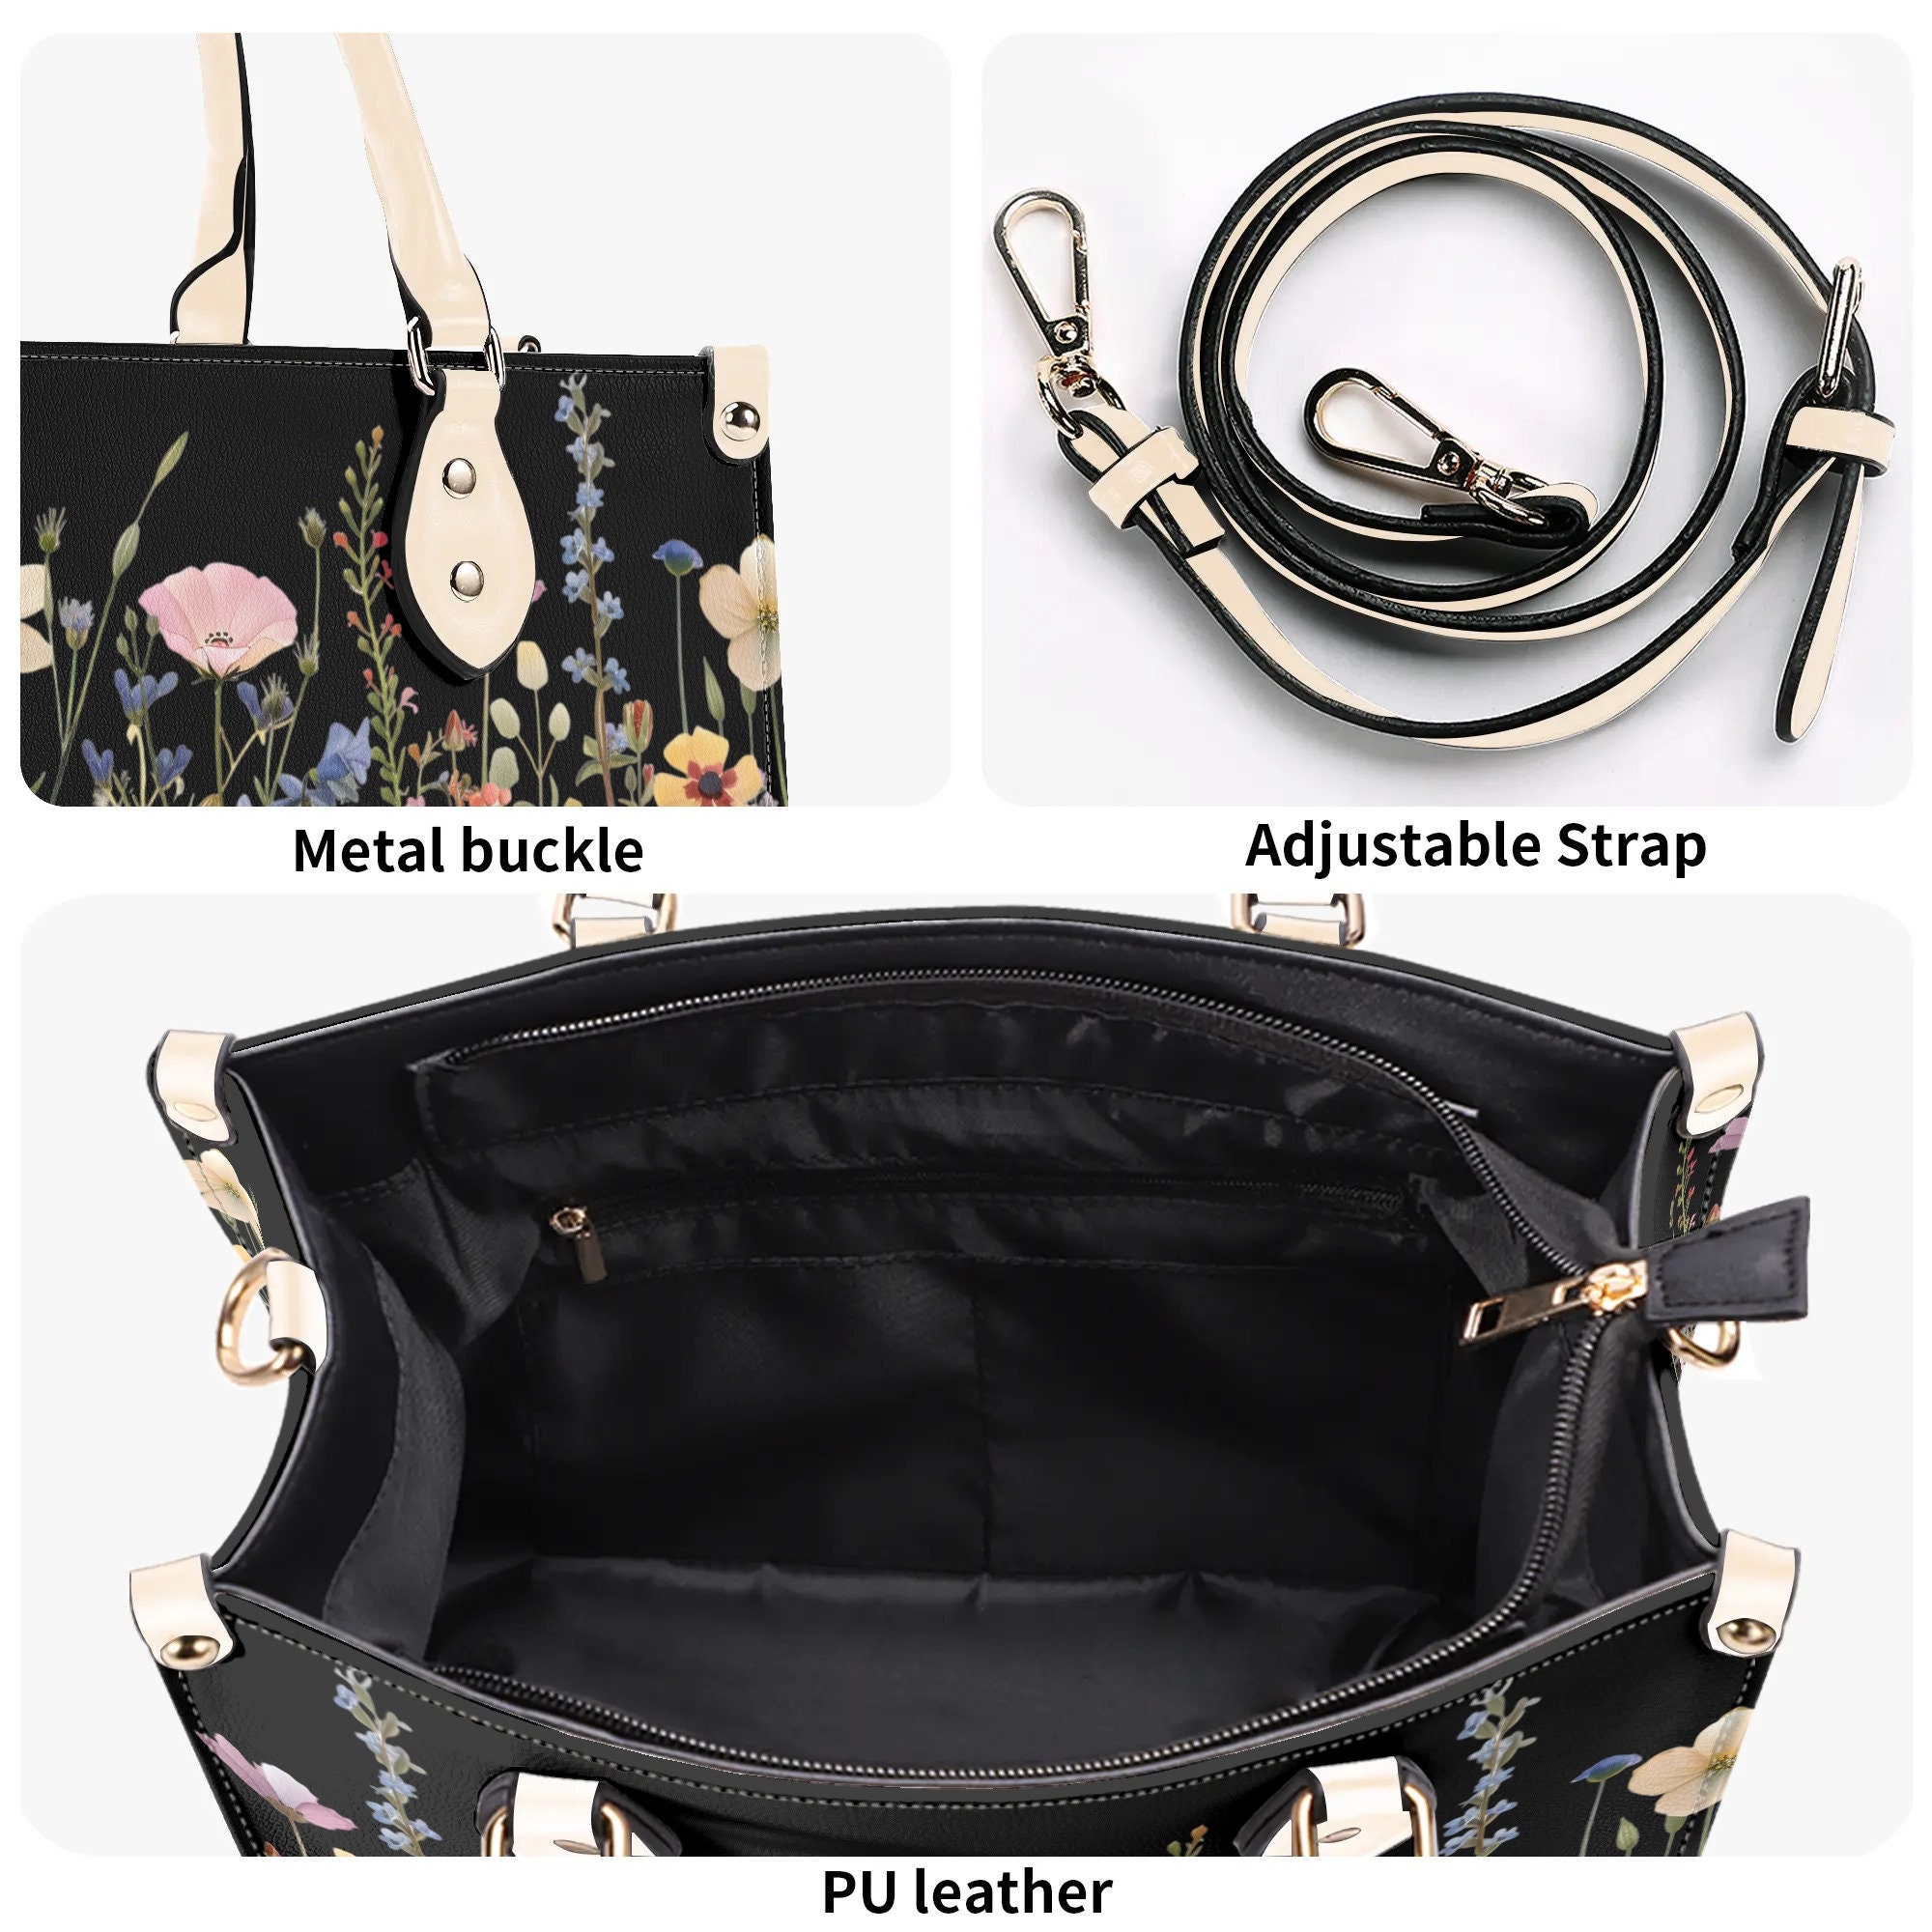 Bloom in Style: The Floral Chic Leather Tote Bag,  Waterproof PU Leather Handbag